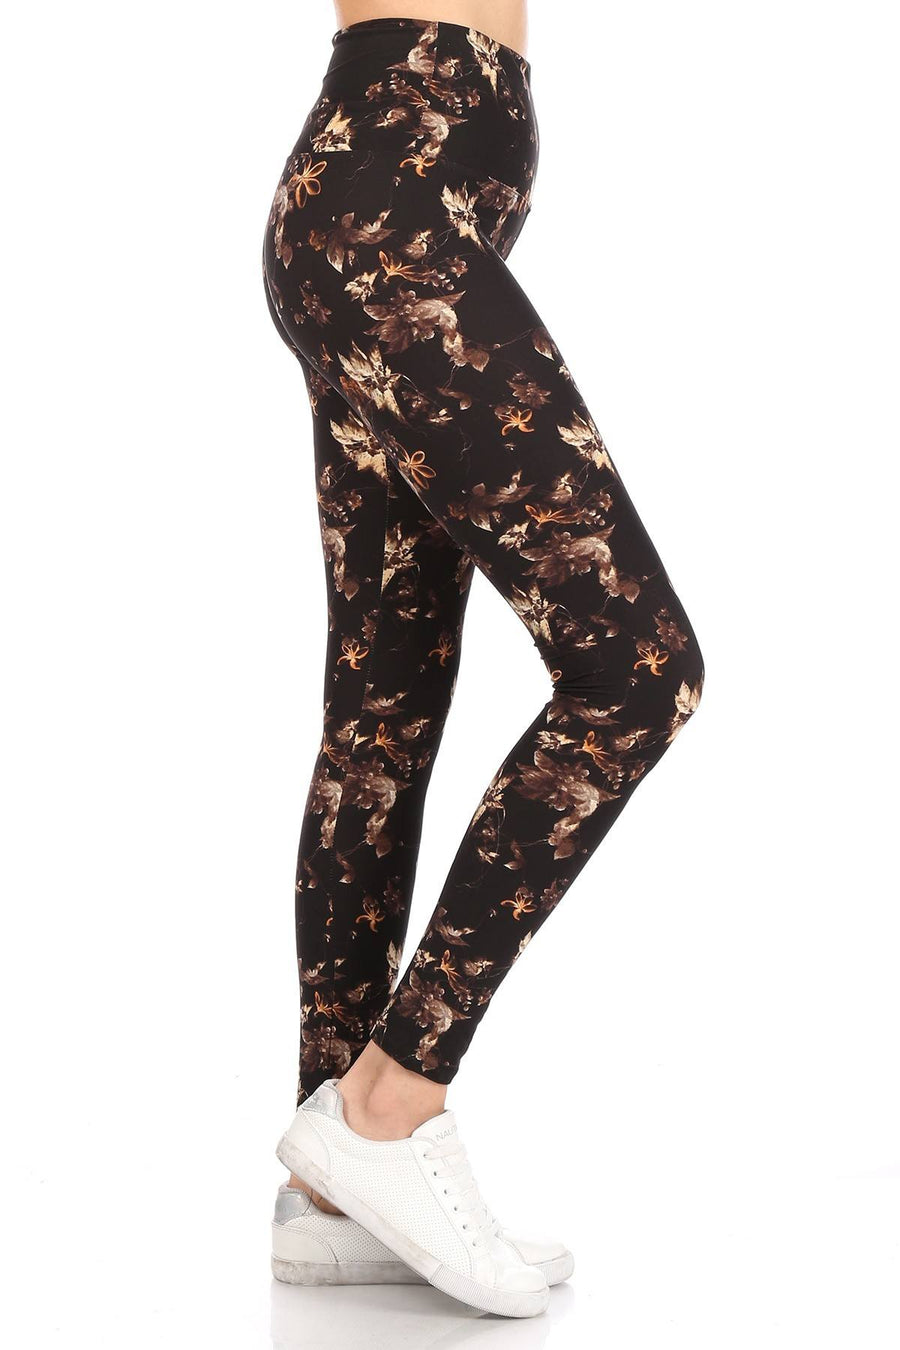 5-inch Long Yoga Style Banded Lined Multi Printed Knit Legging With High Waist - Passion 4 Fashion USA